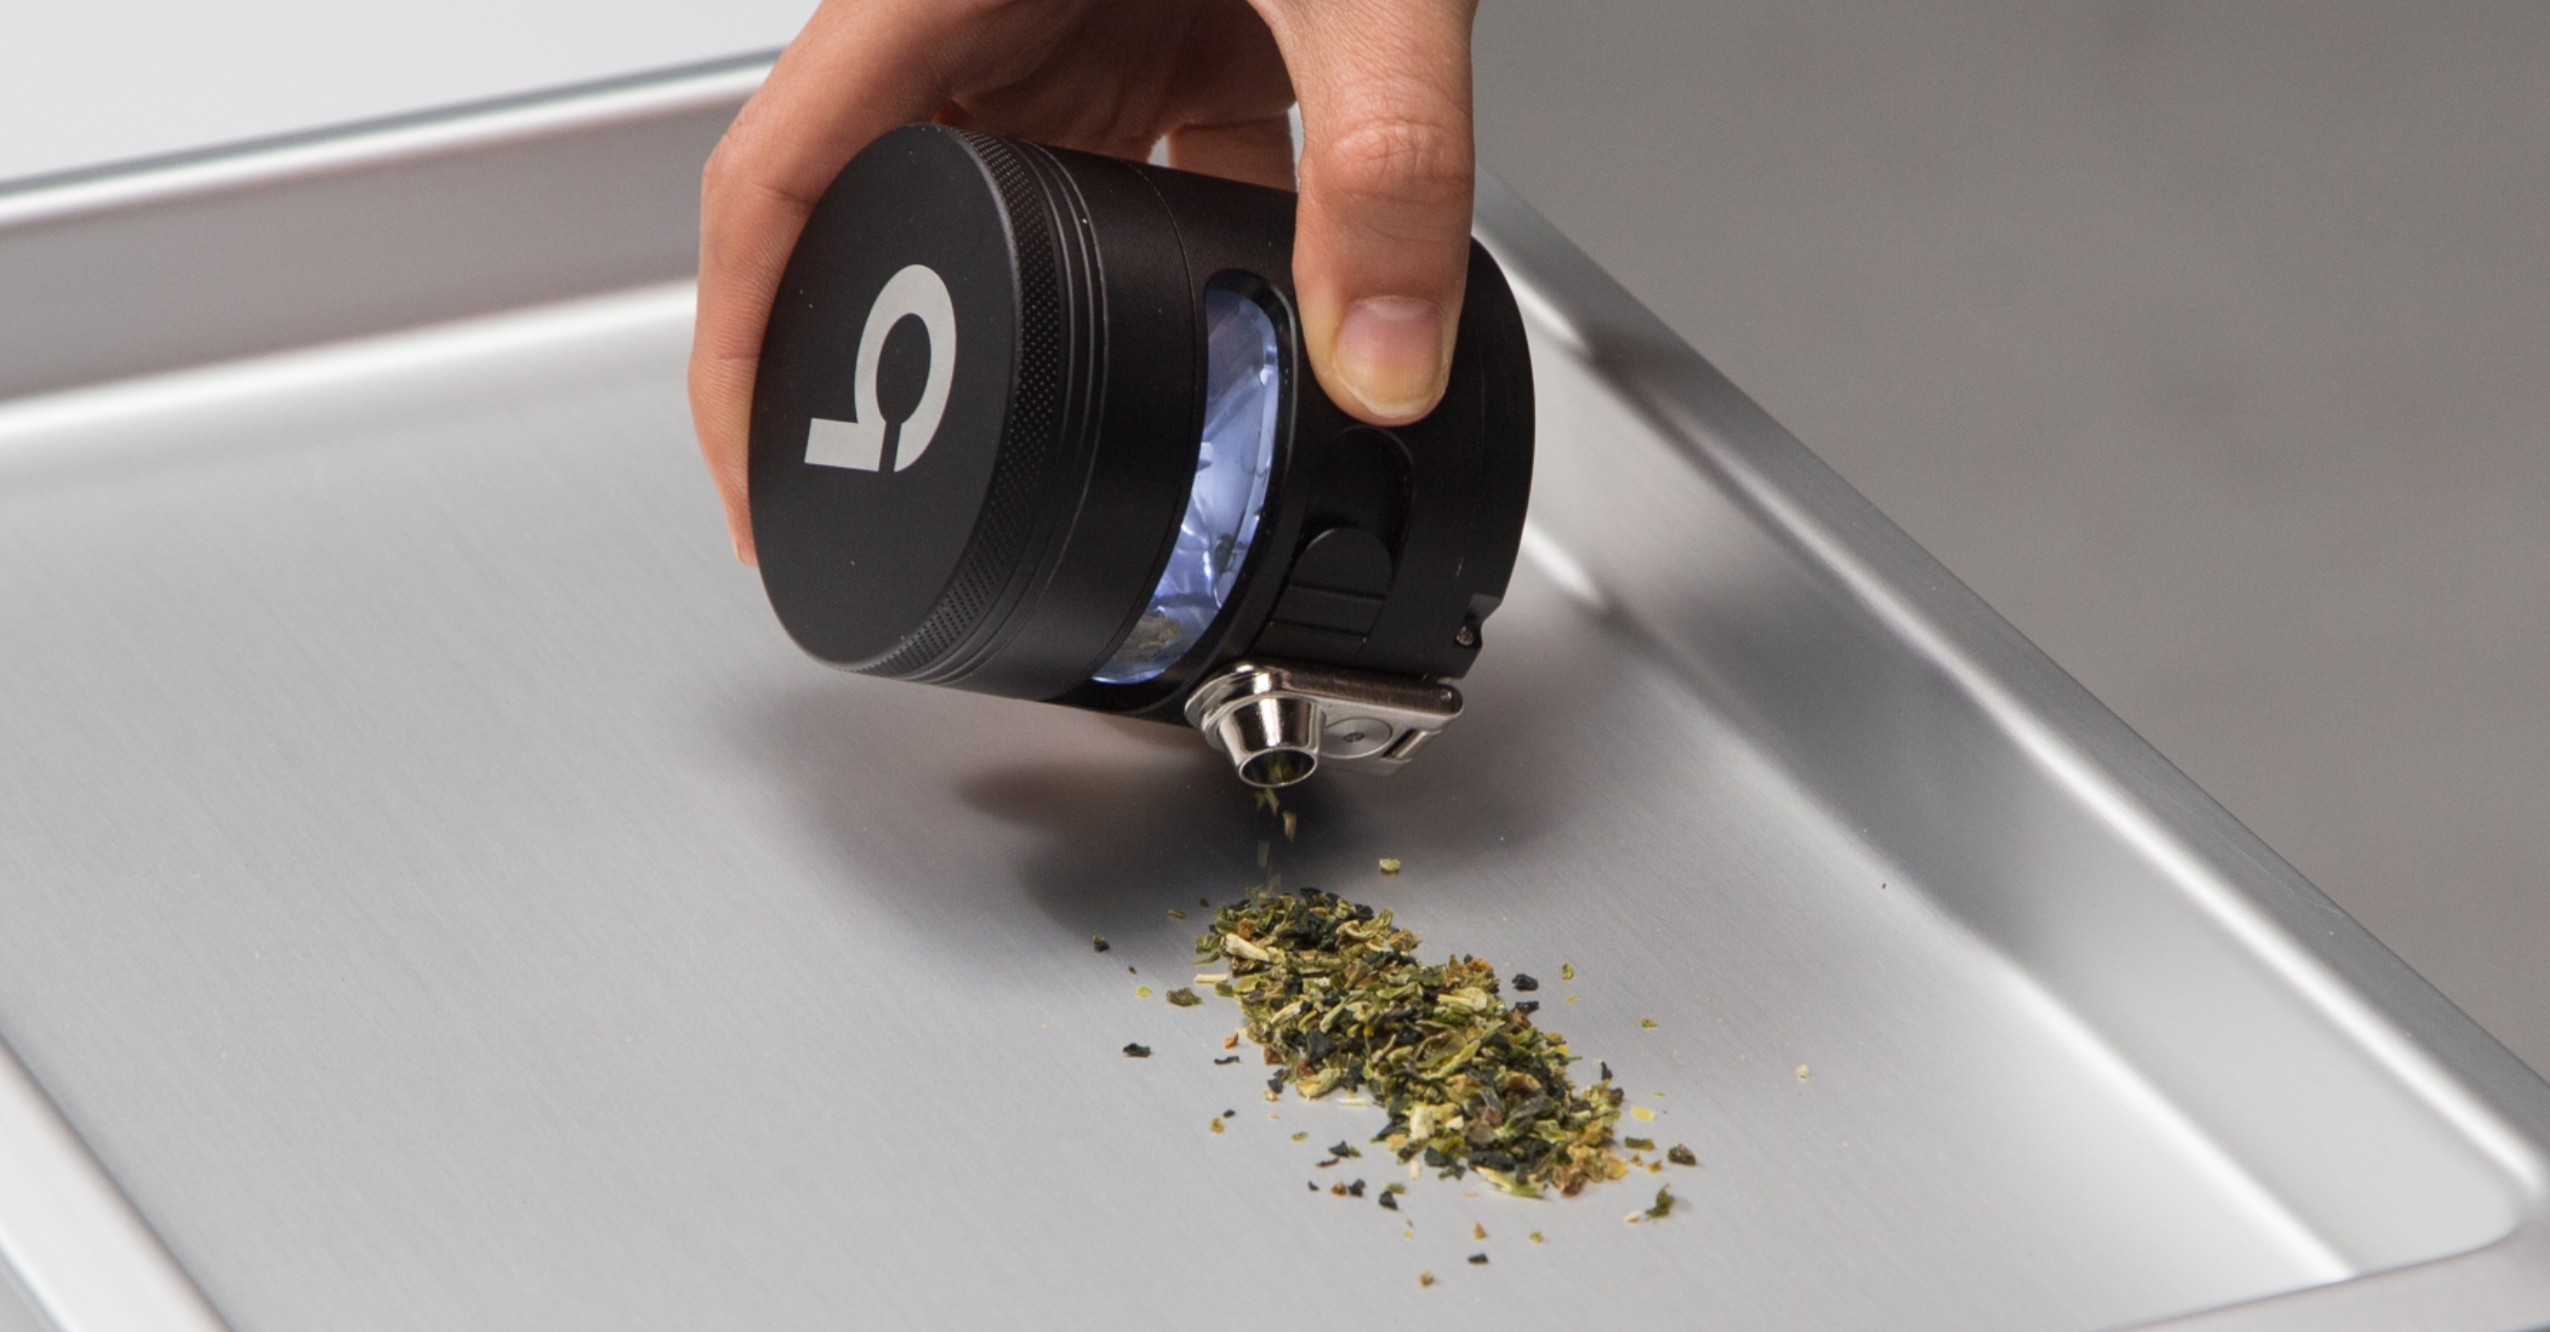 This Vibrating Cannabis Grinder Could Be A Total Game Changer - Maxim